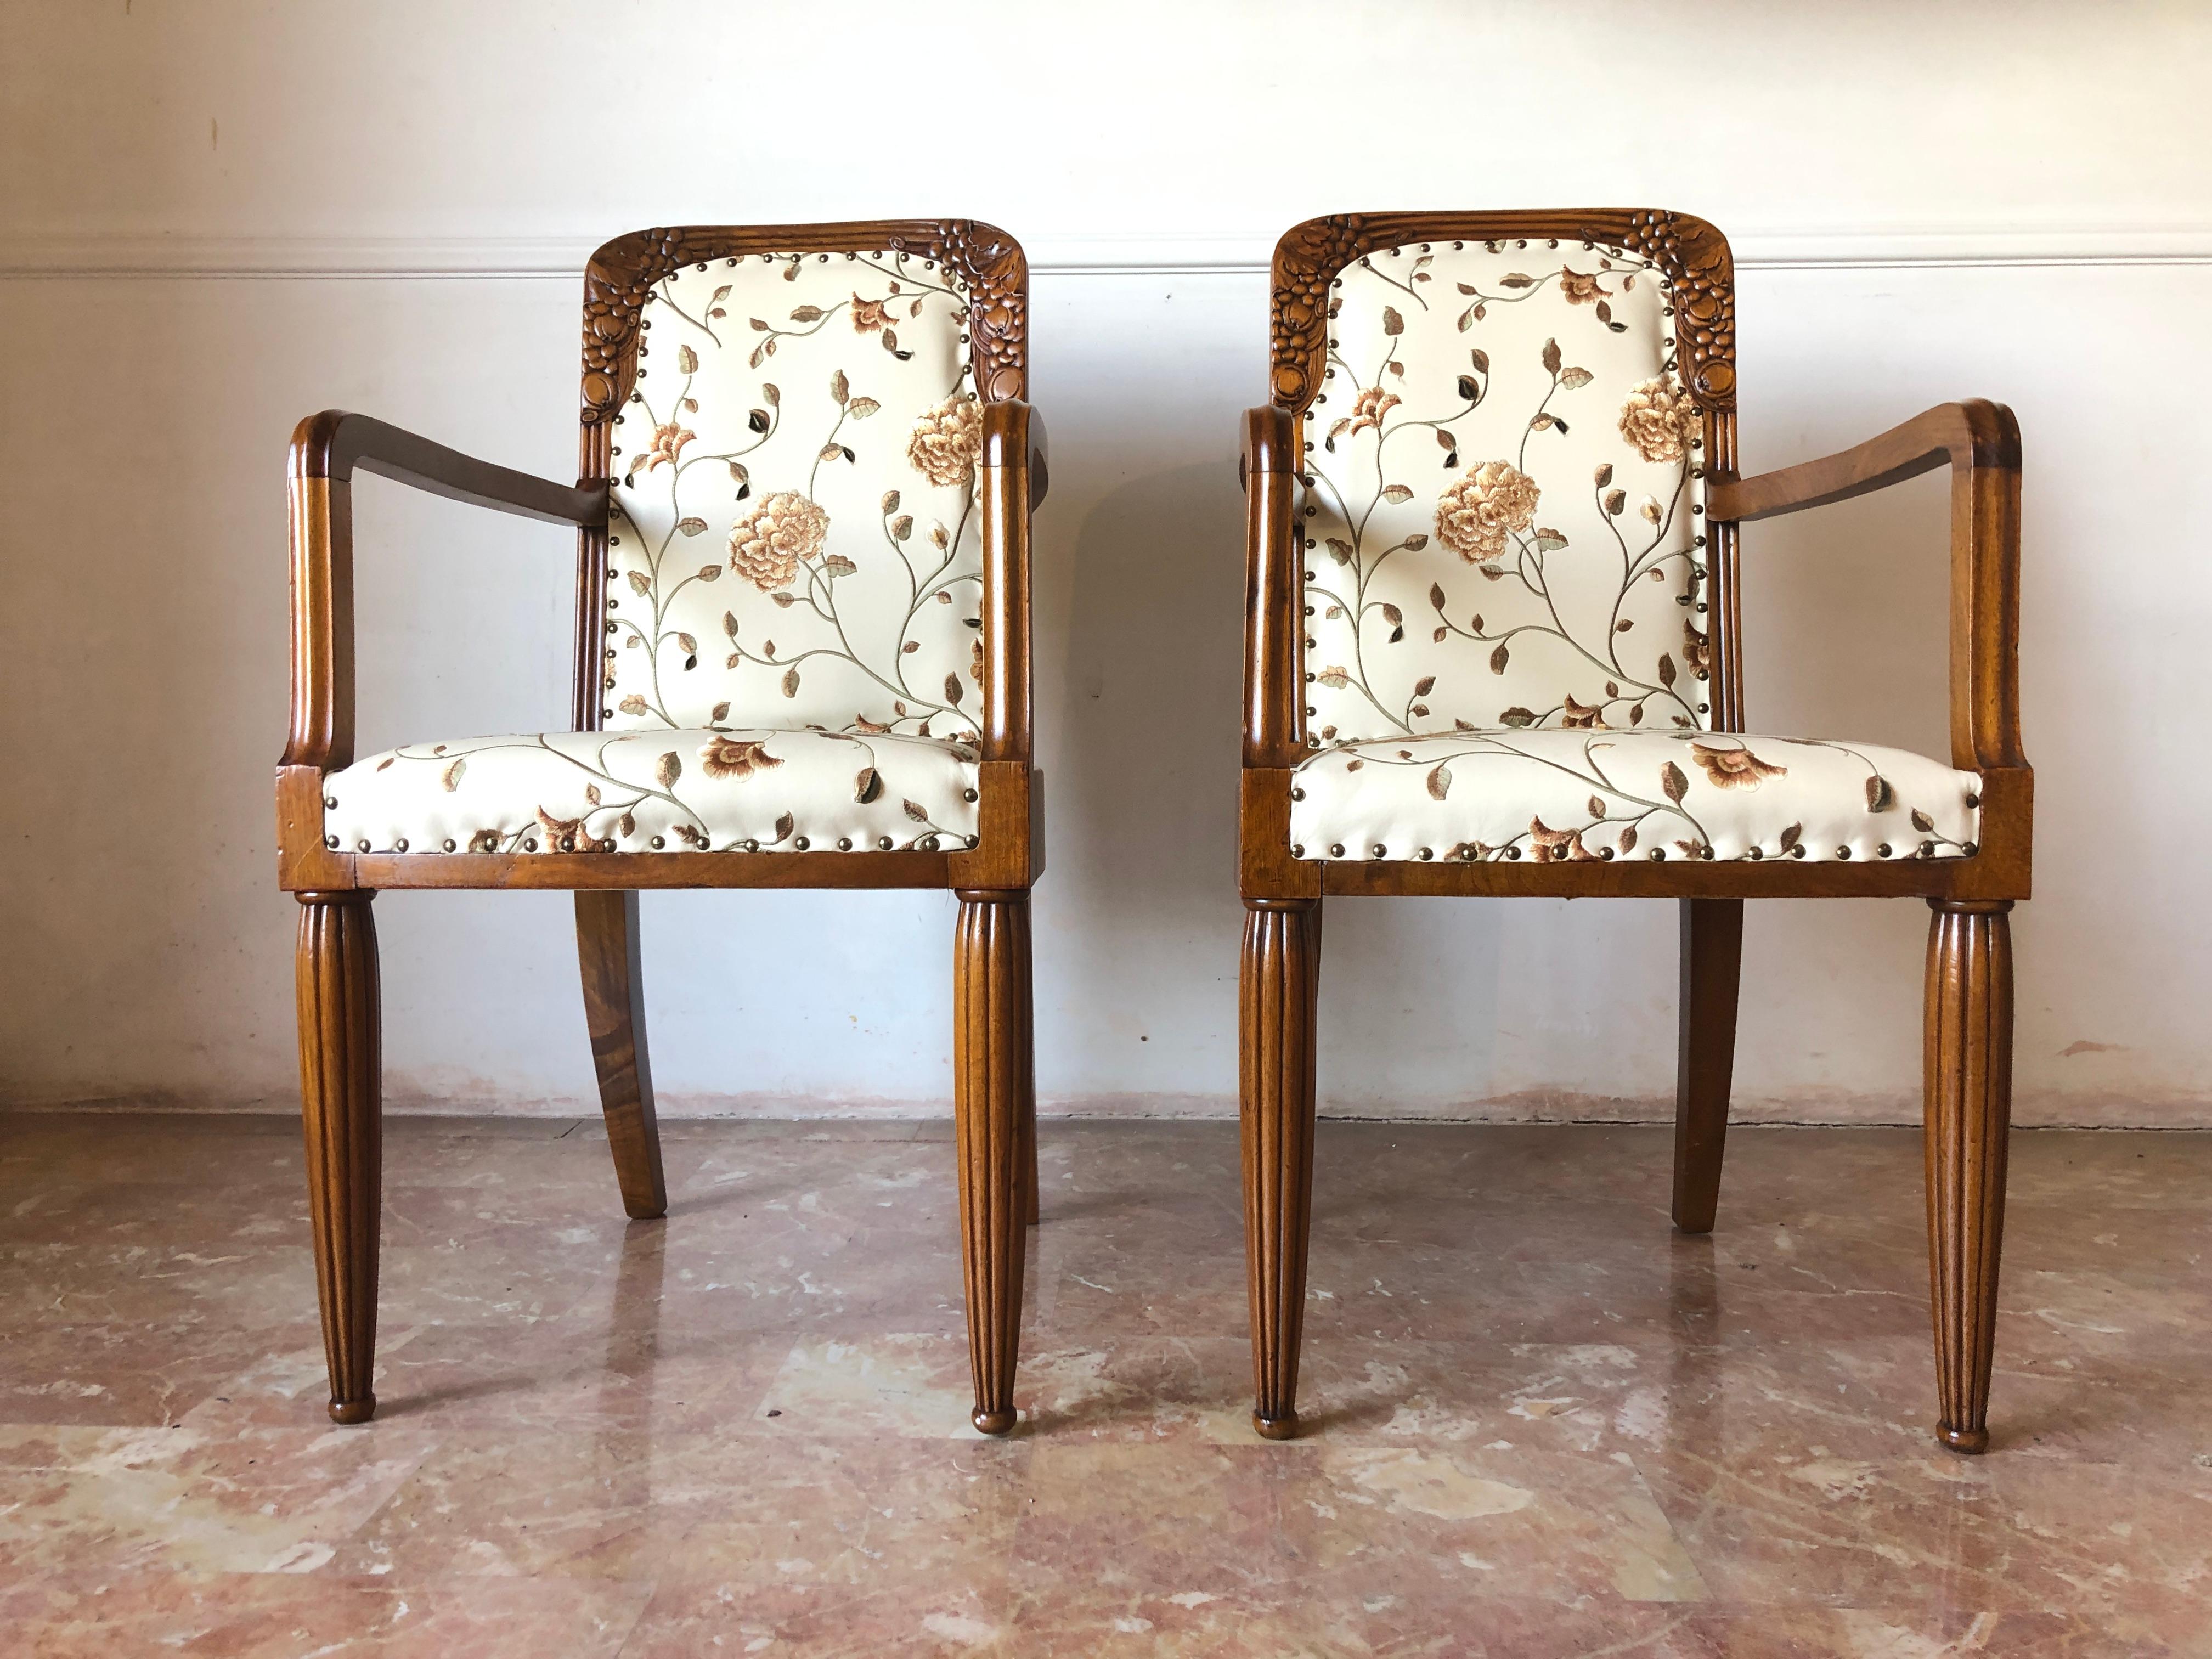 Beautiful French armchairs in walnut with decorative inlays on the backs, grooved legs, new upholstery in faux leather with embossed plant motifs.